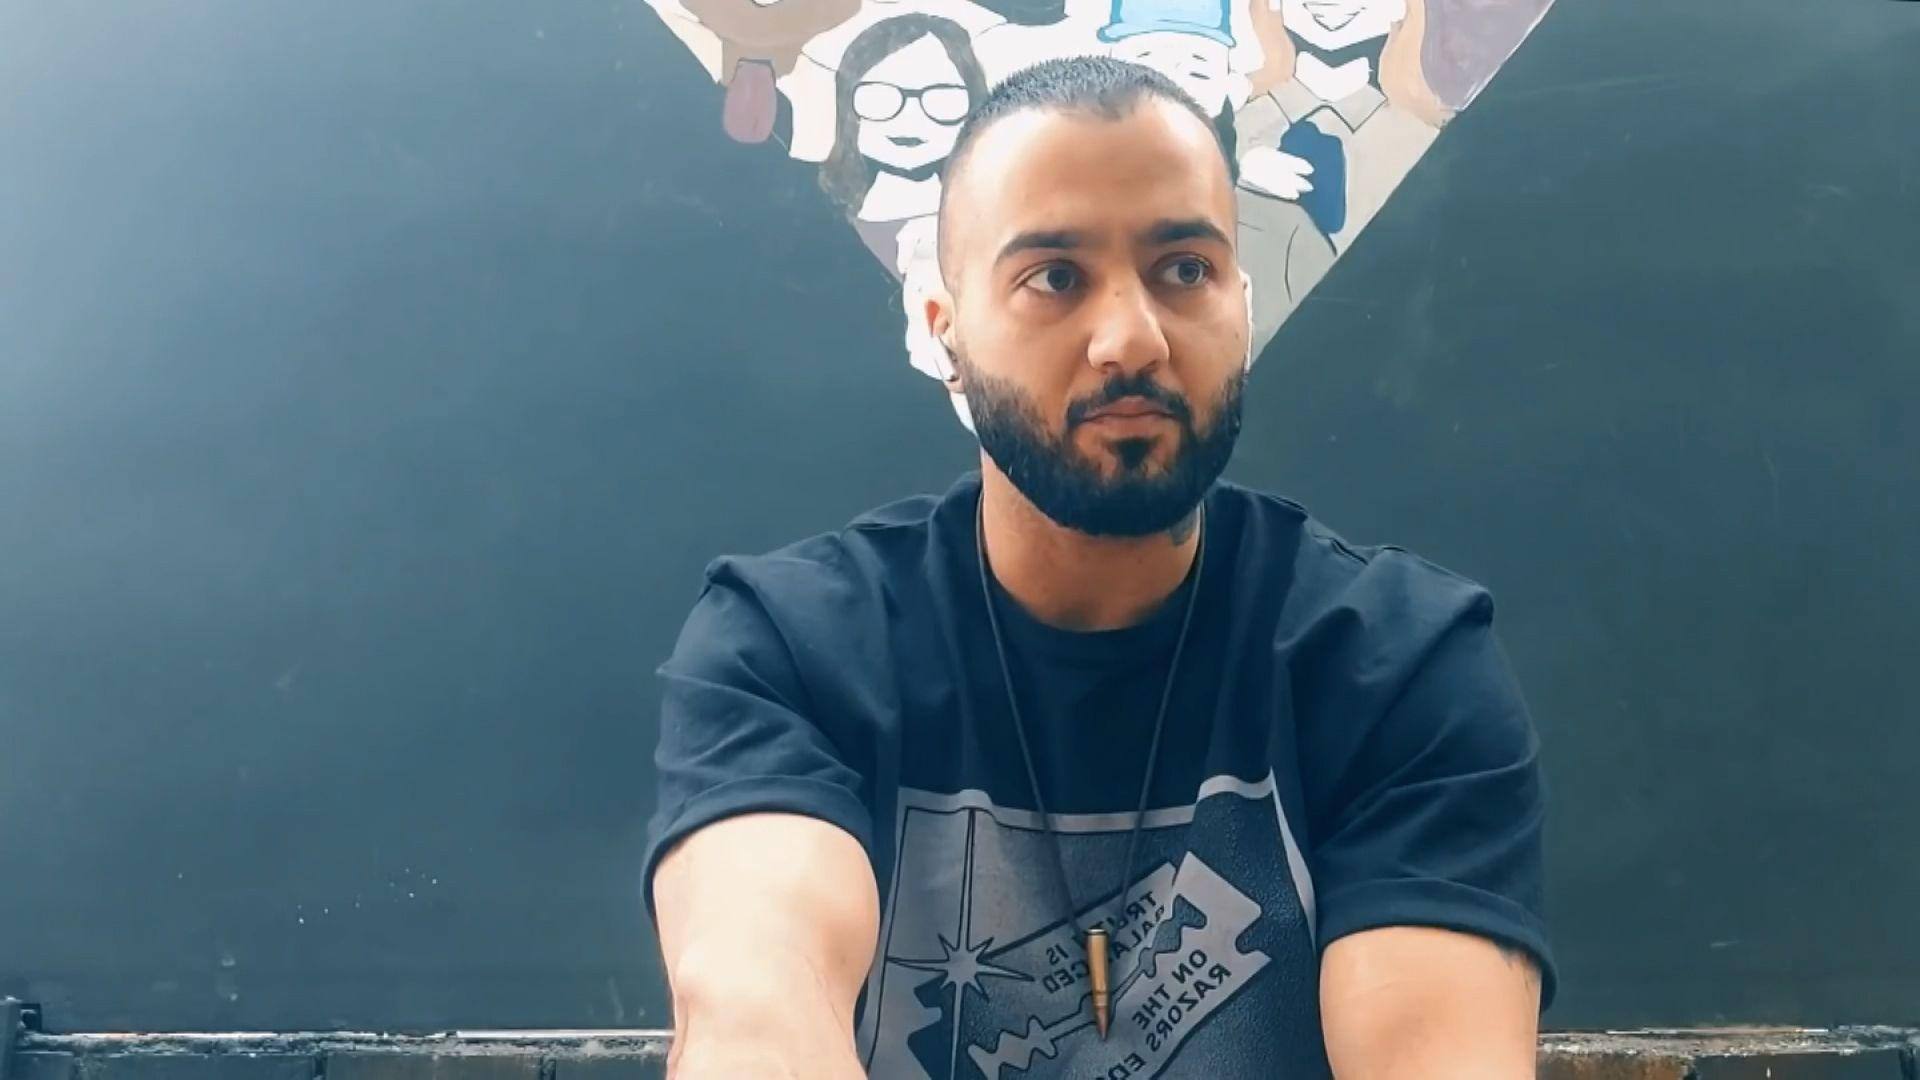 Iranian rapper sentenced to death for participating in anti-government protests